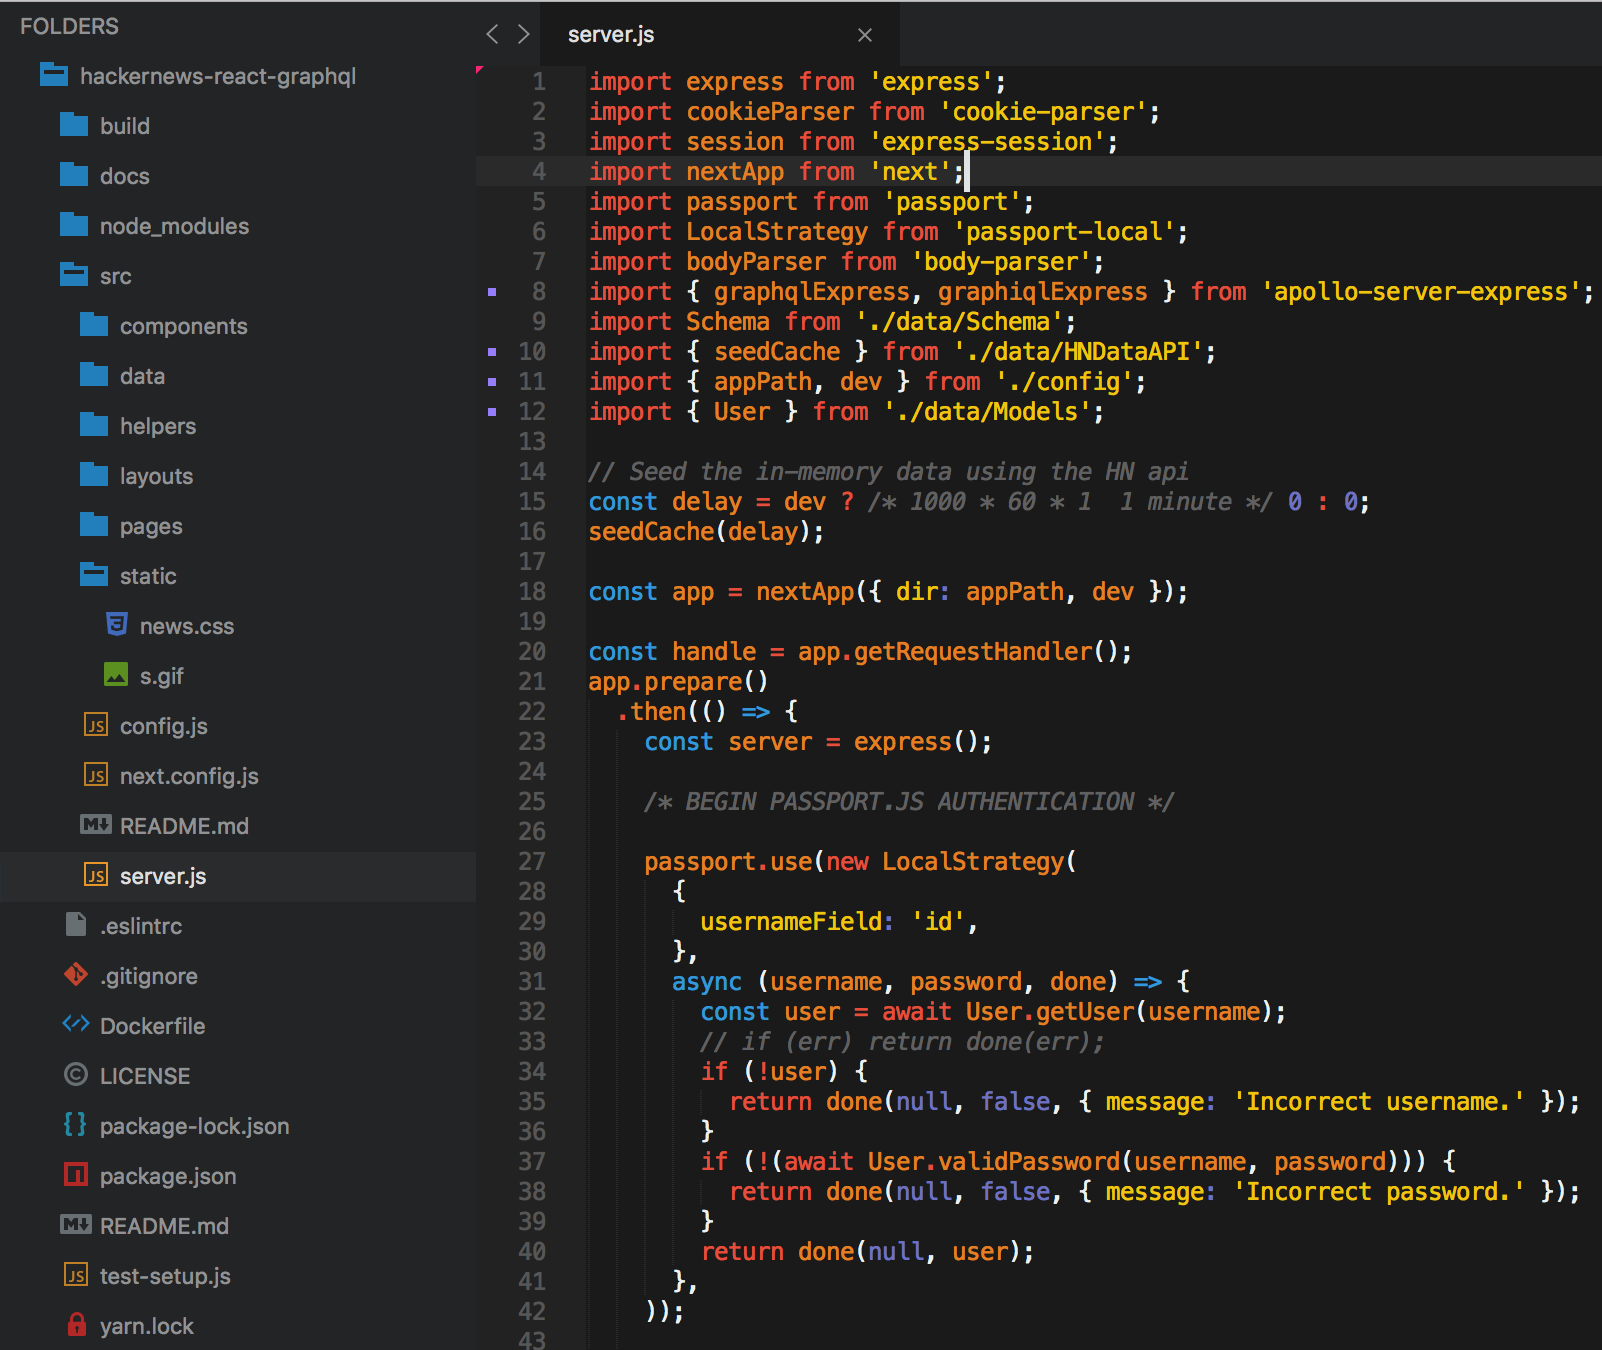 how to download sublime text plugins